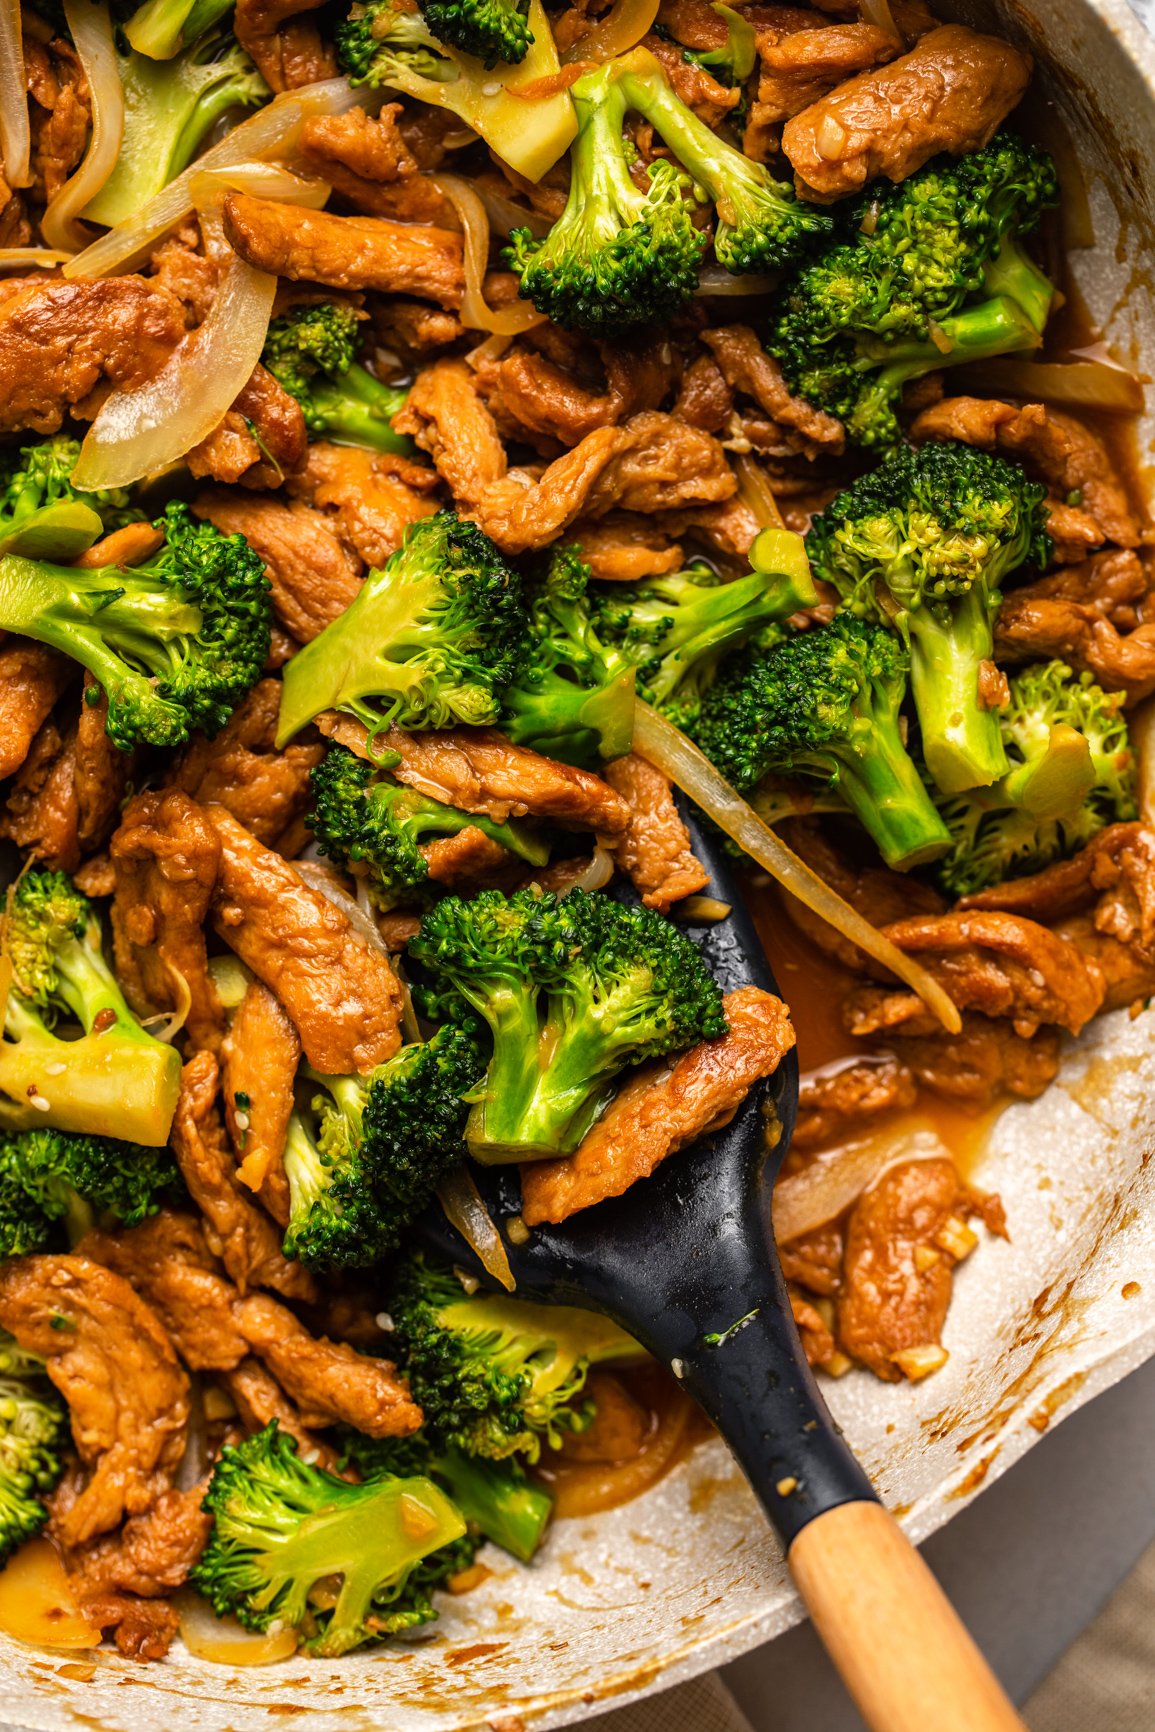 large pan of beef & broccoli with wooden spatula scooping a serving portion out of it